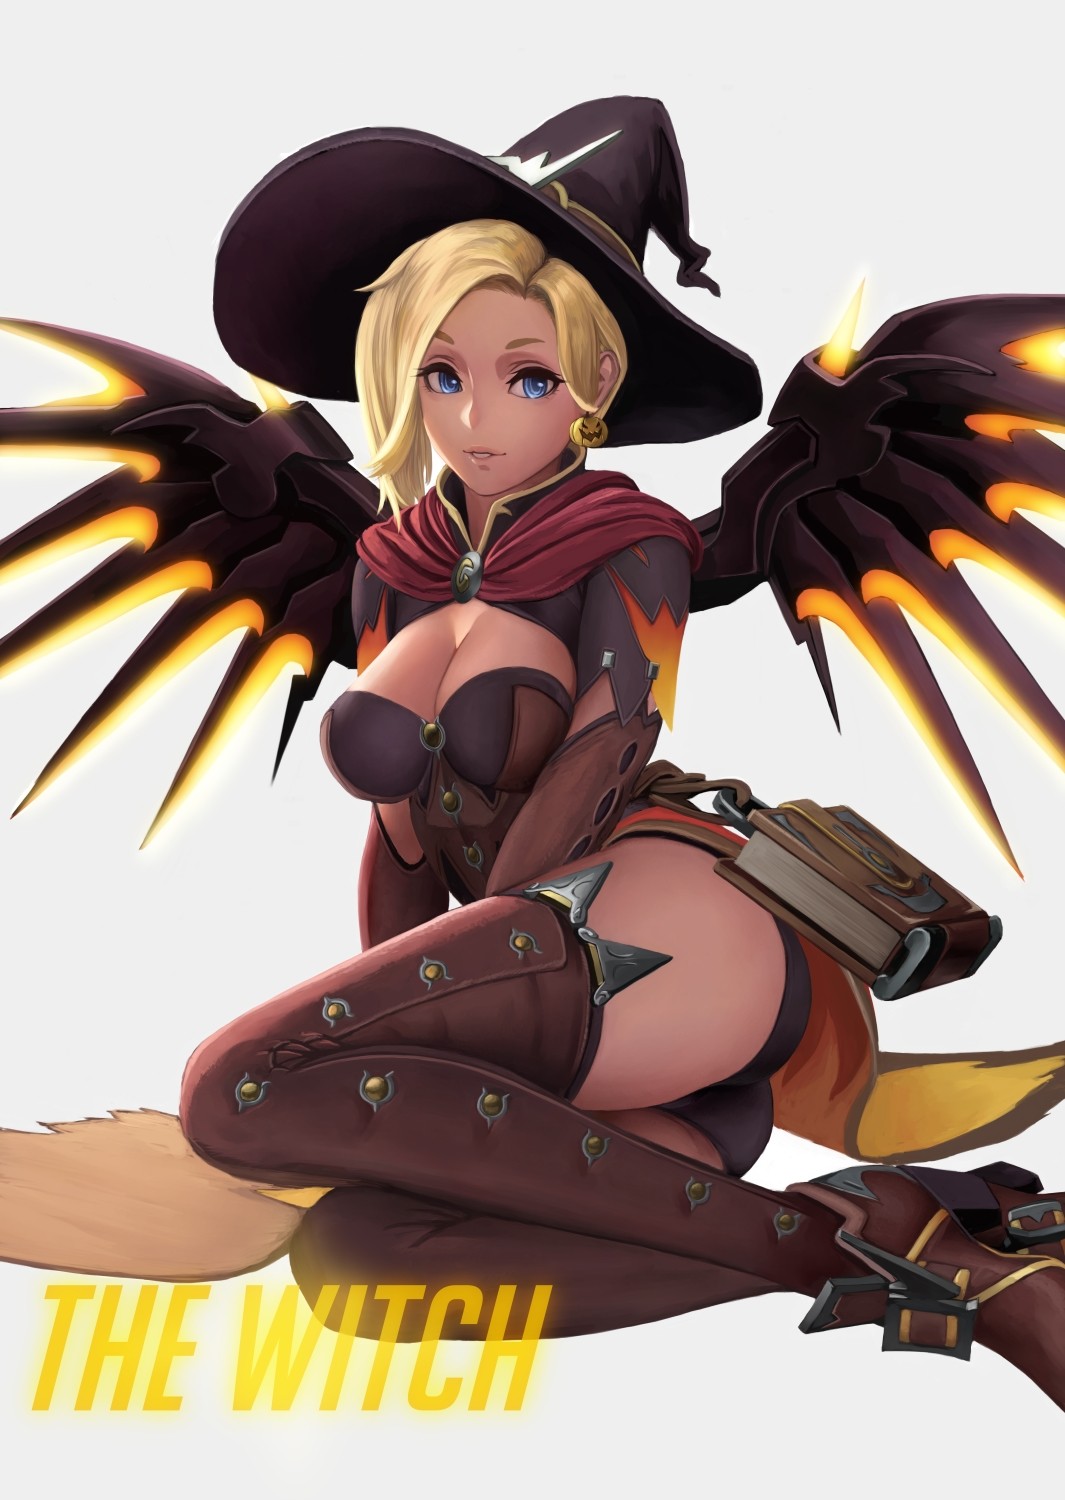 Anime 1065x1500 anime anime girls Overwatch Mercy (Overwatch) stockings open shirt wings witch witch hat blue eyes short hair blonde Witch Mercy (Overwatch)